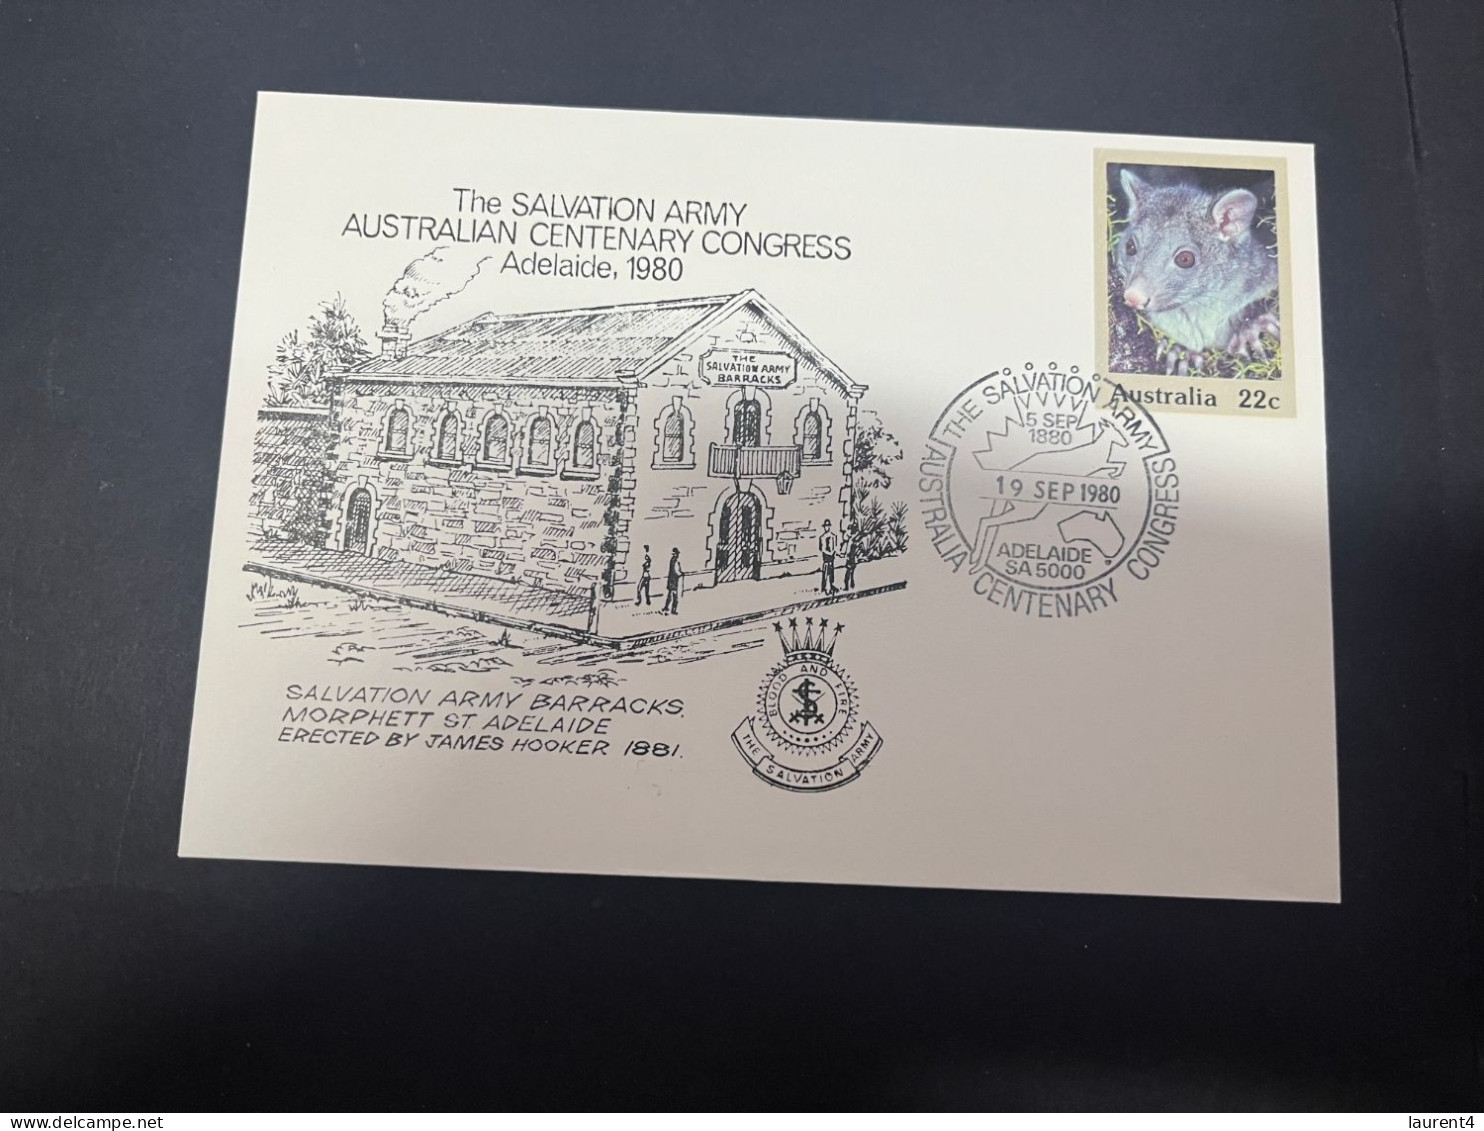 2-5-2024 (3 Z 39) Australia FDC (1 Covers) 1980 - Salvation Army Australian Centenary Congress In Adelaide (Brushtail) - Sobre Primer Día (FDC)